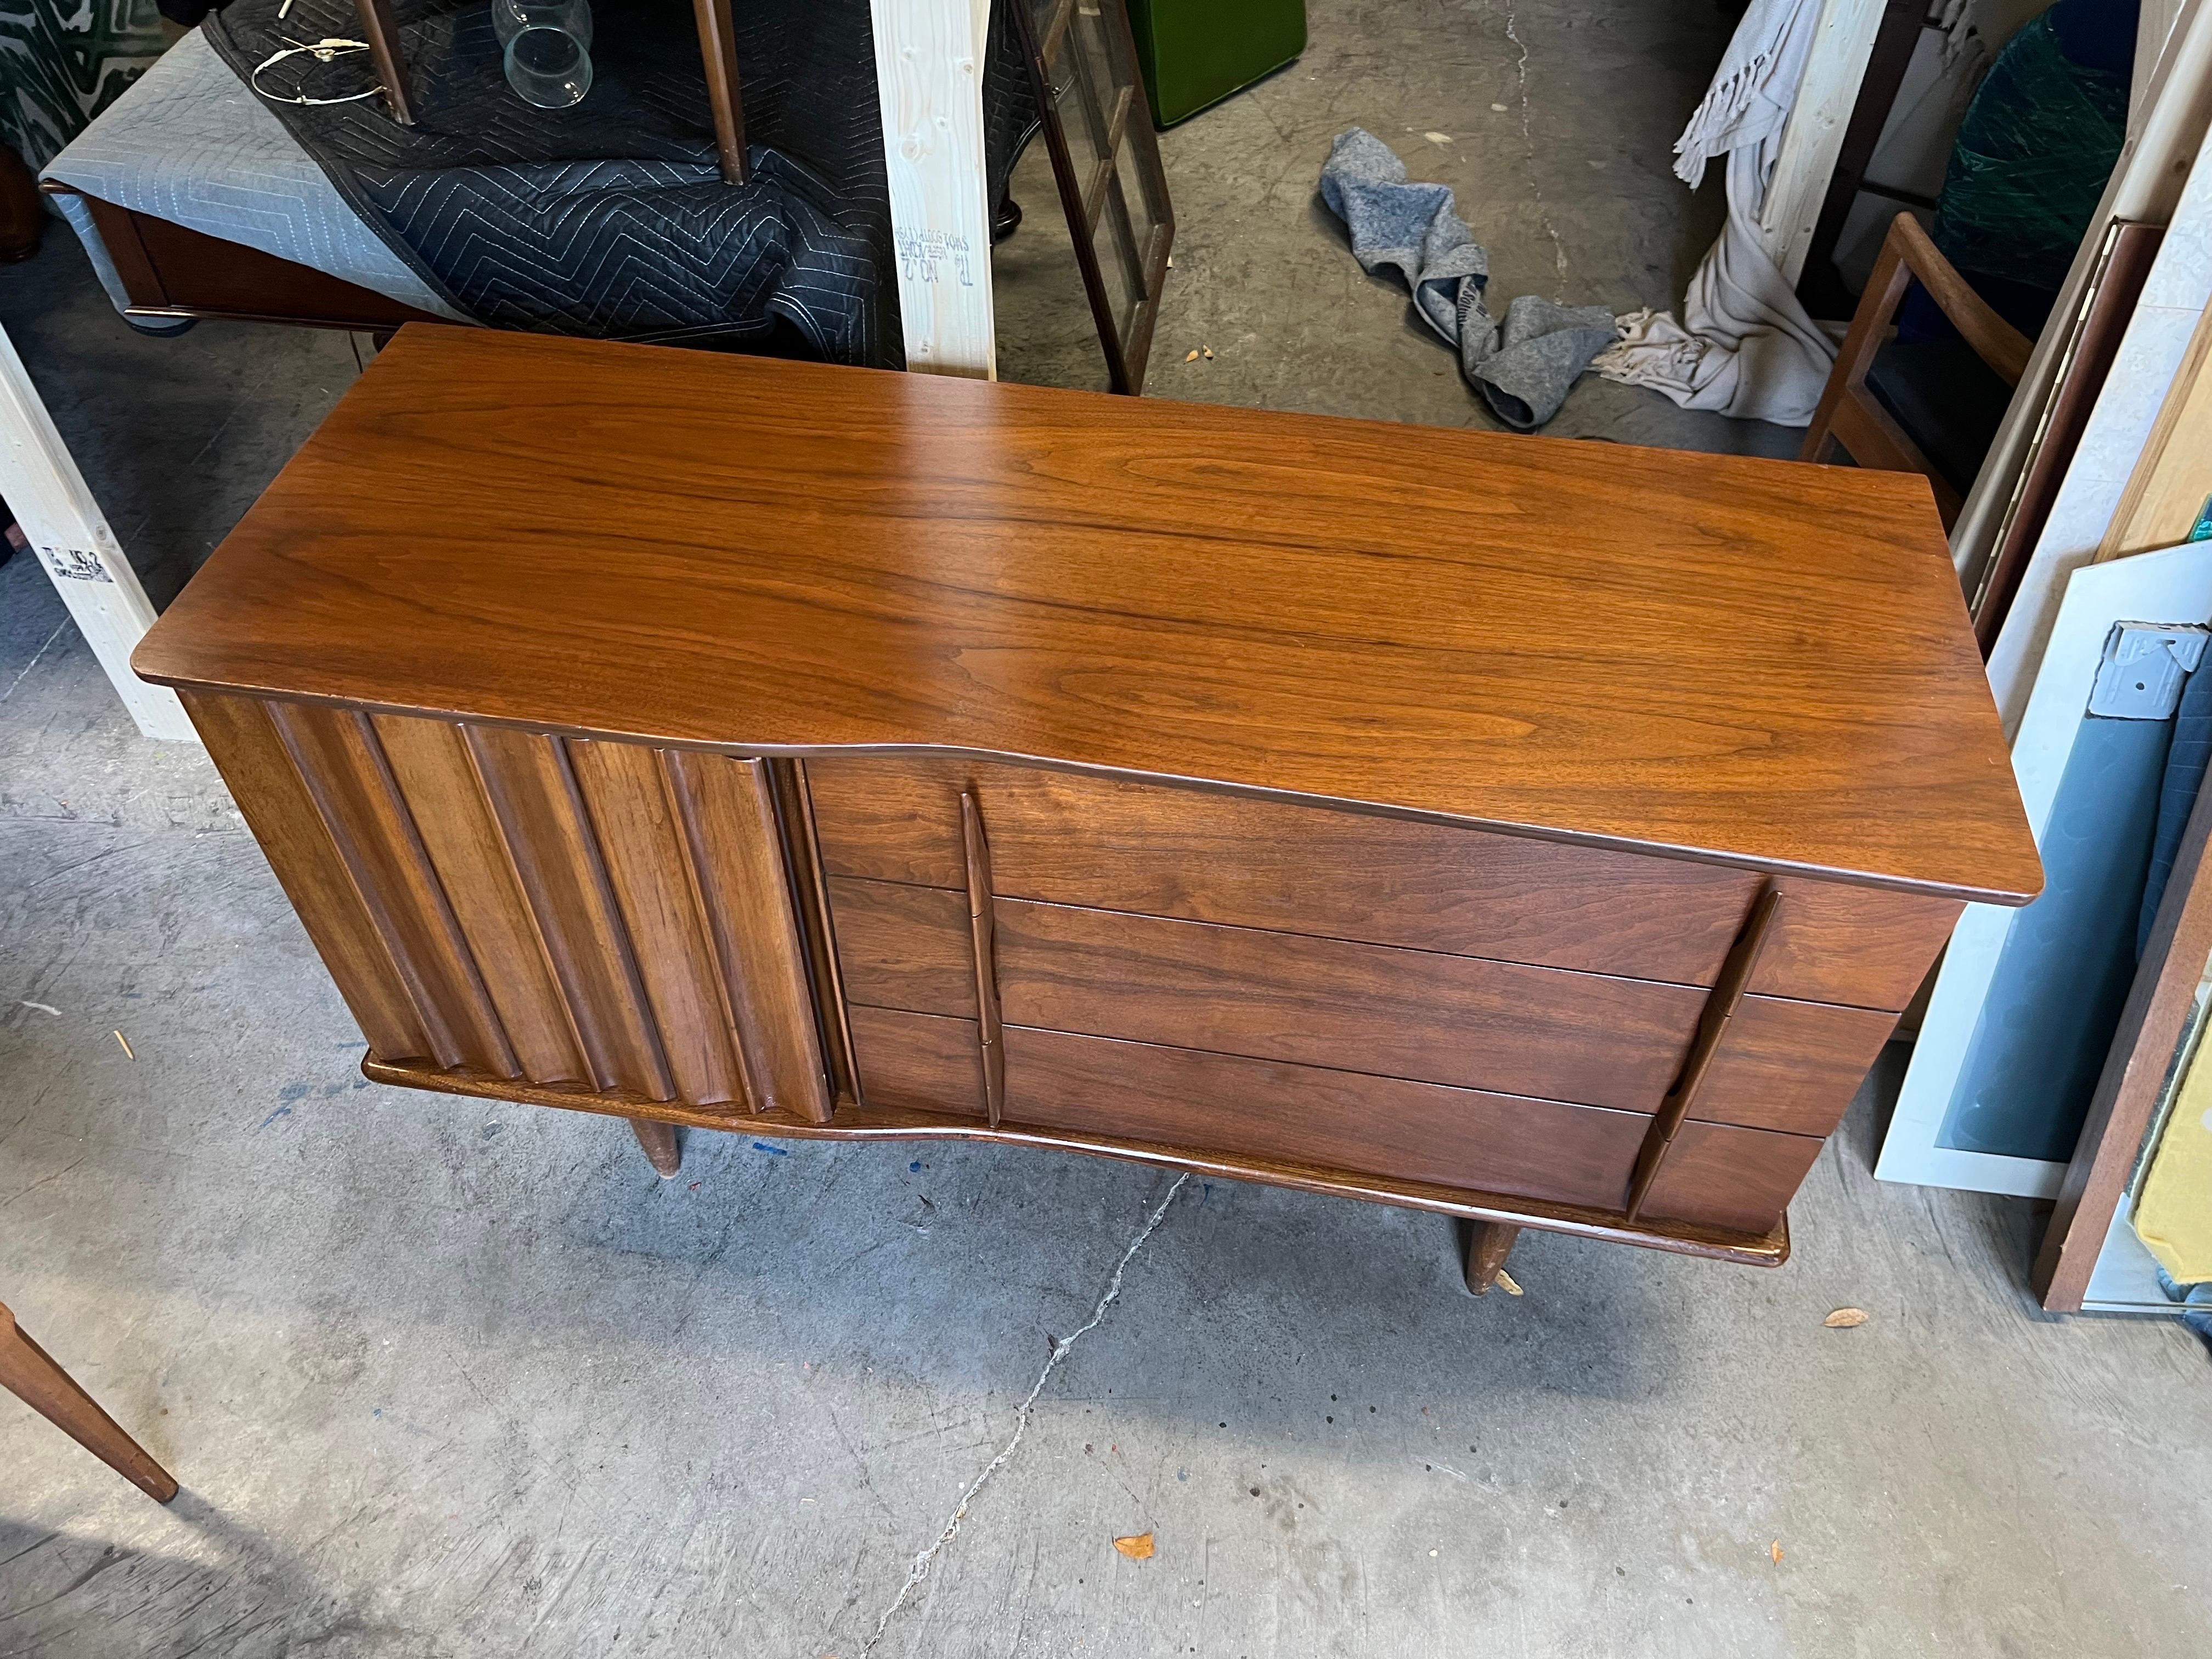 Here is a very nice walnut 6 drawer dresser by United Furniture Corporation, circa 1960s. Internally we call this piece the 